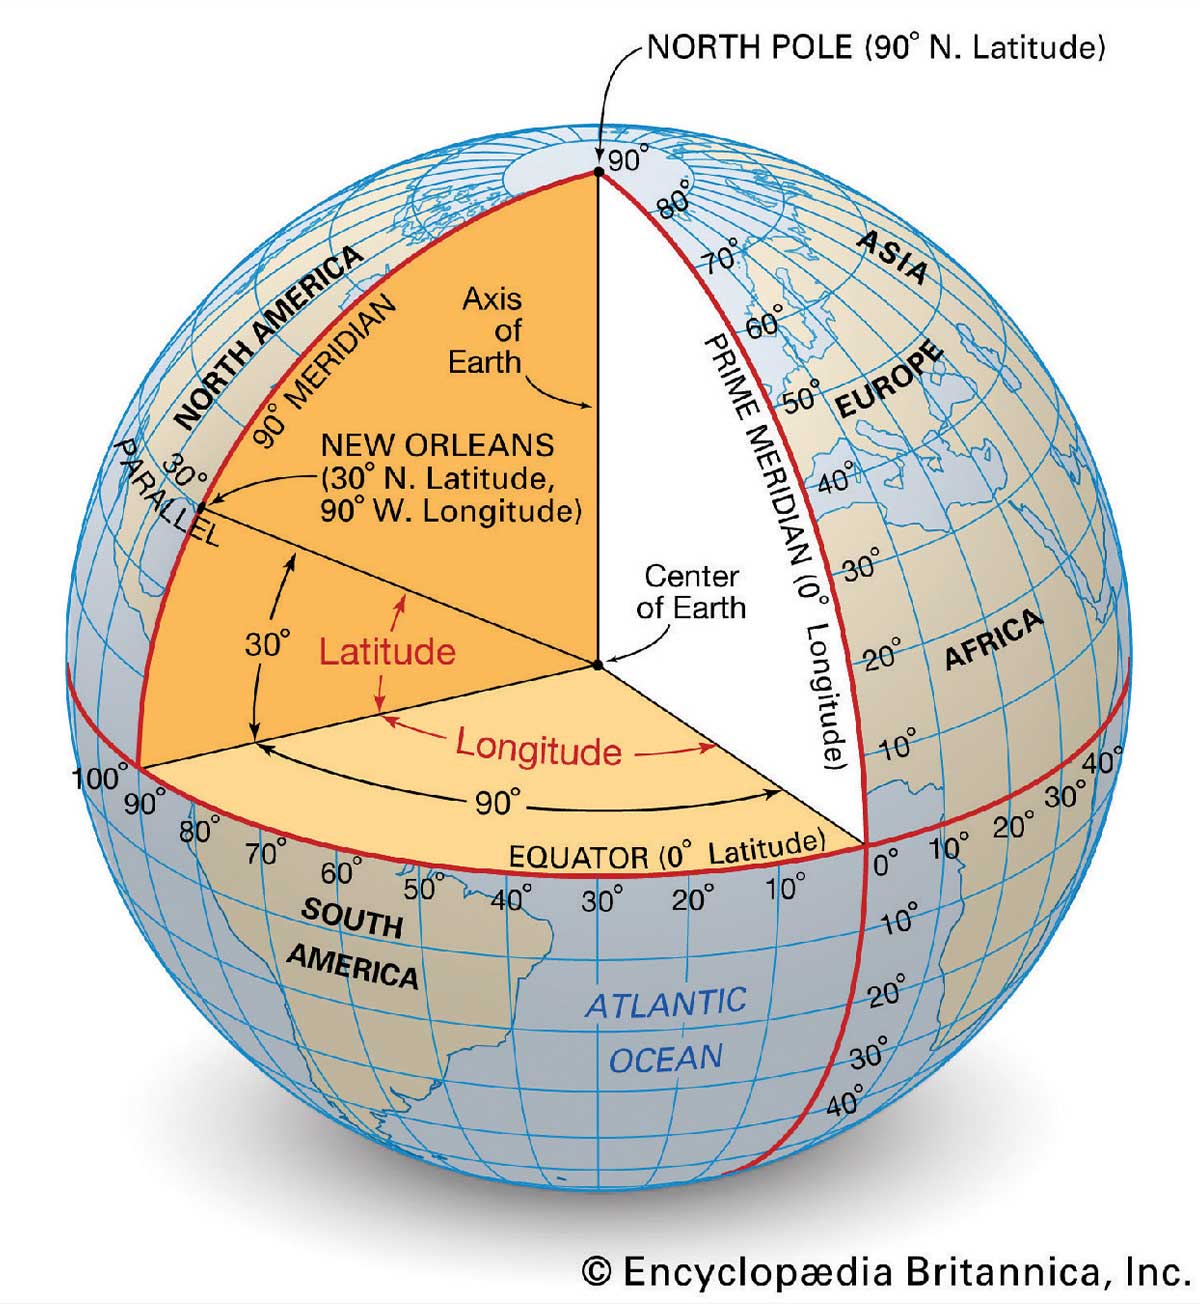 An illustration of the earth that shows the relationship between latitude, longitude, the equator, and prime meridian and the grid they form